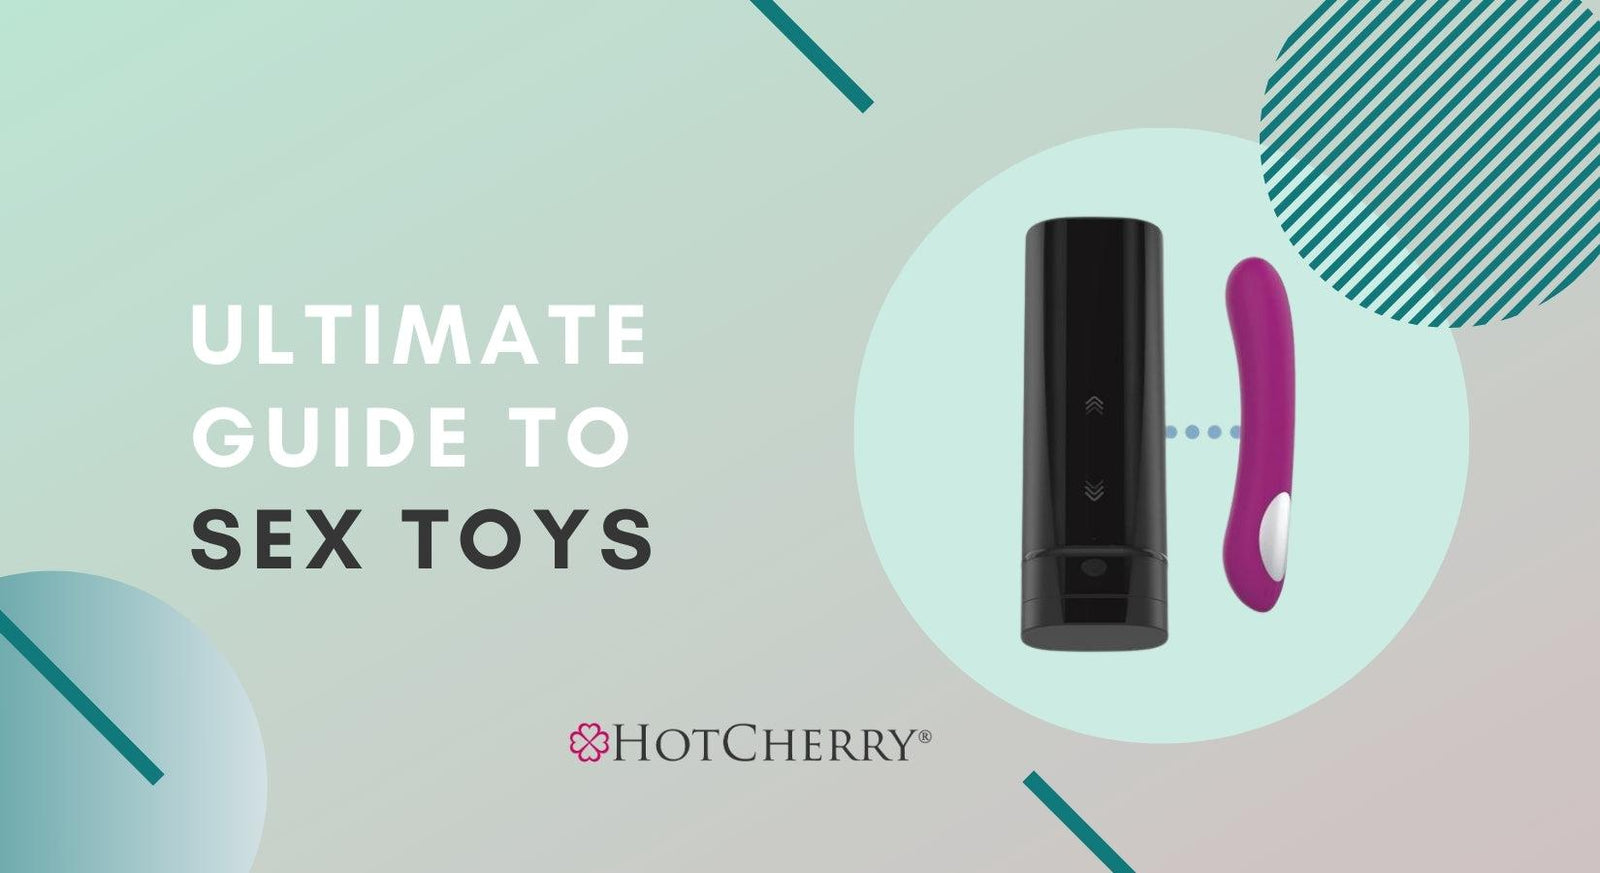 Ultimate Guide to Sex Toys